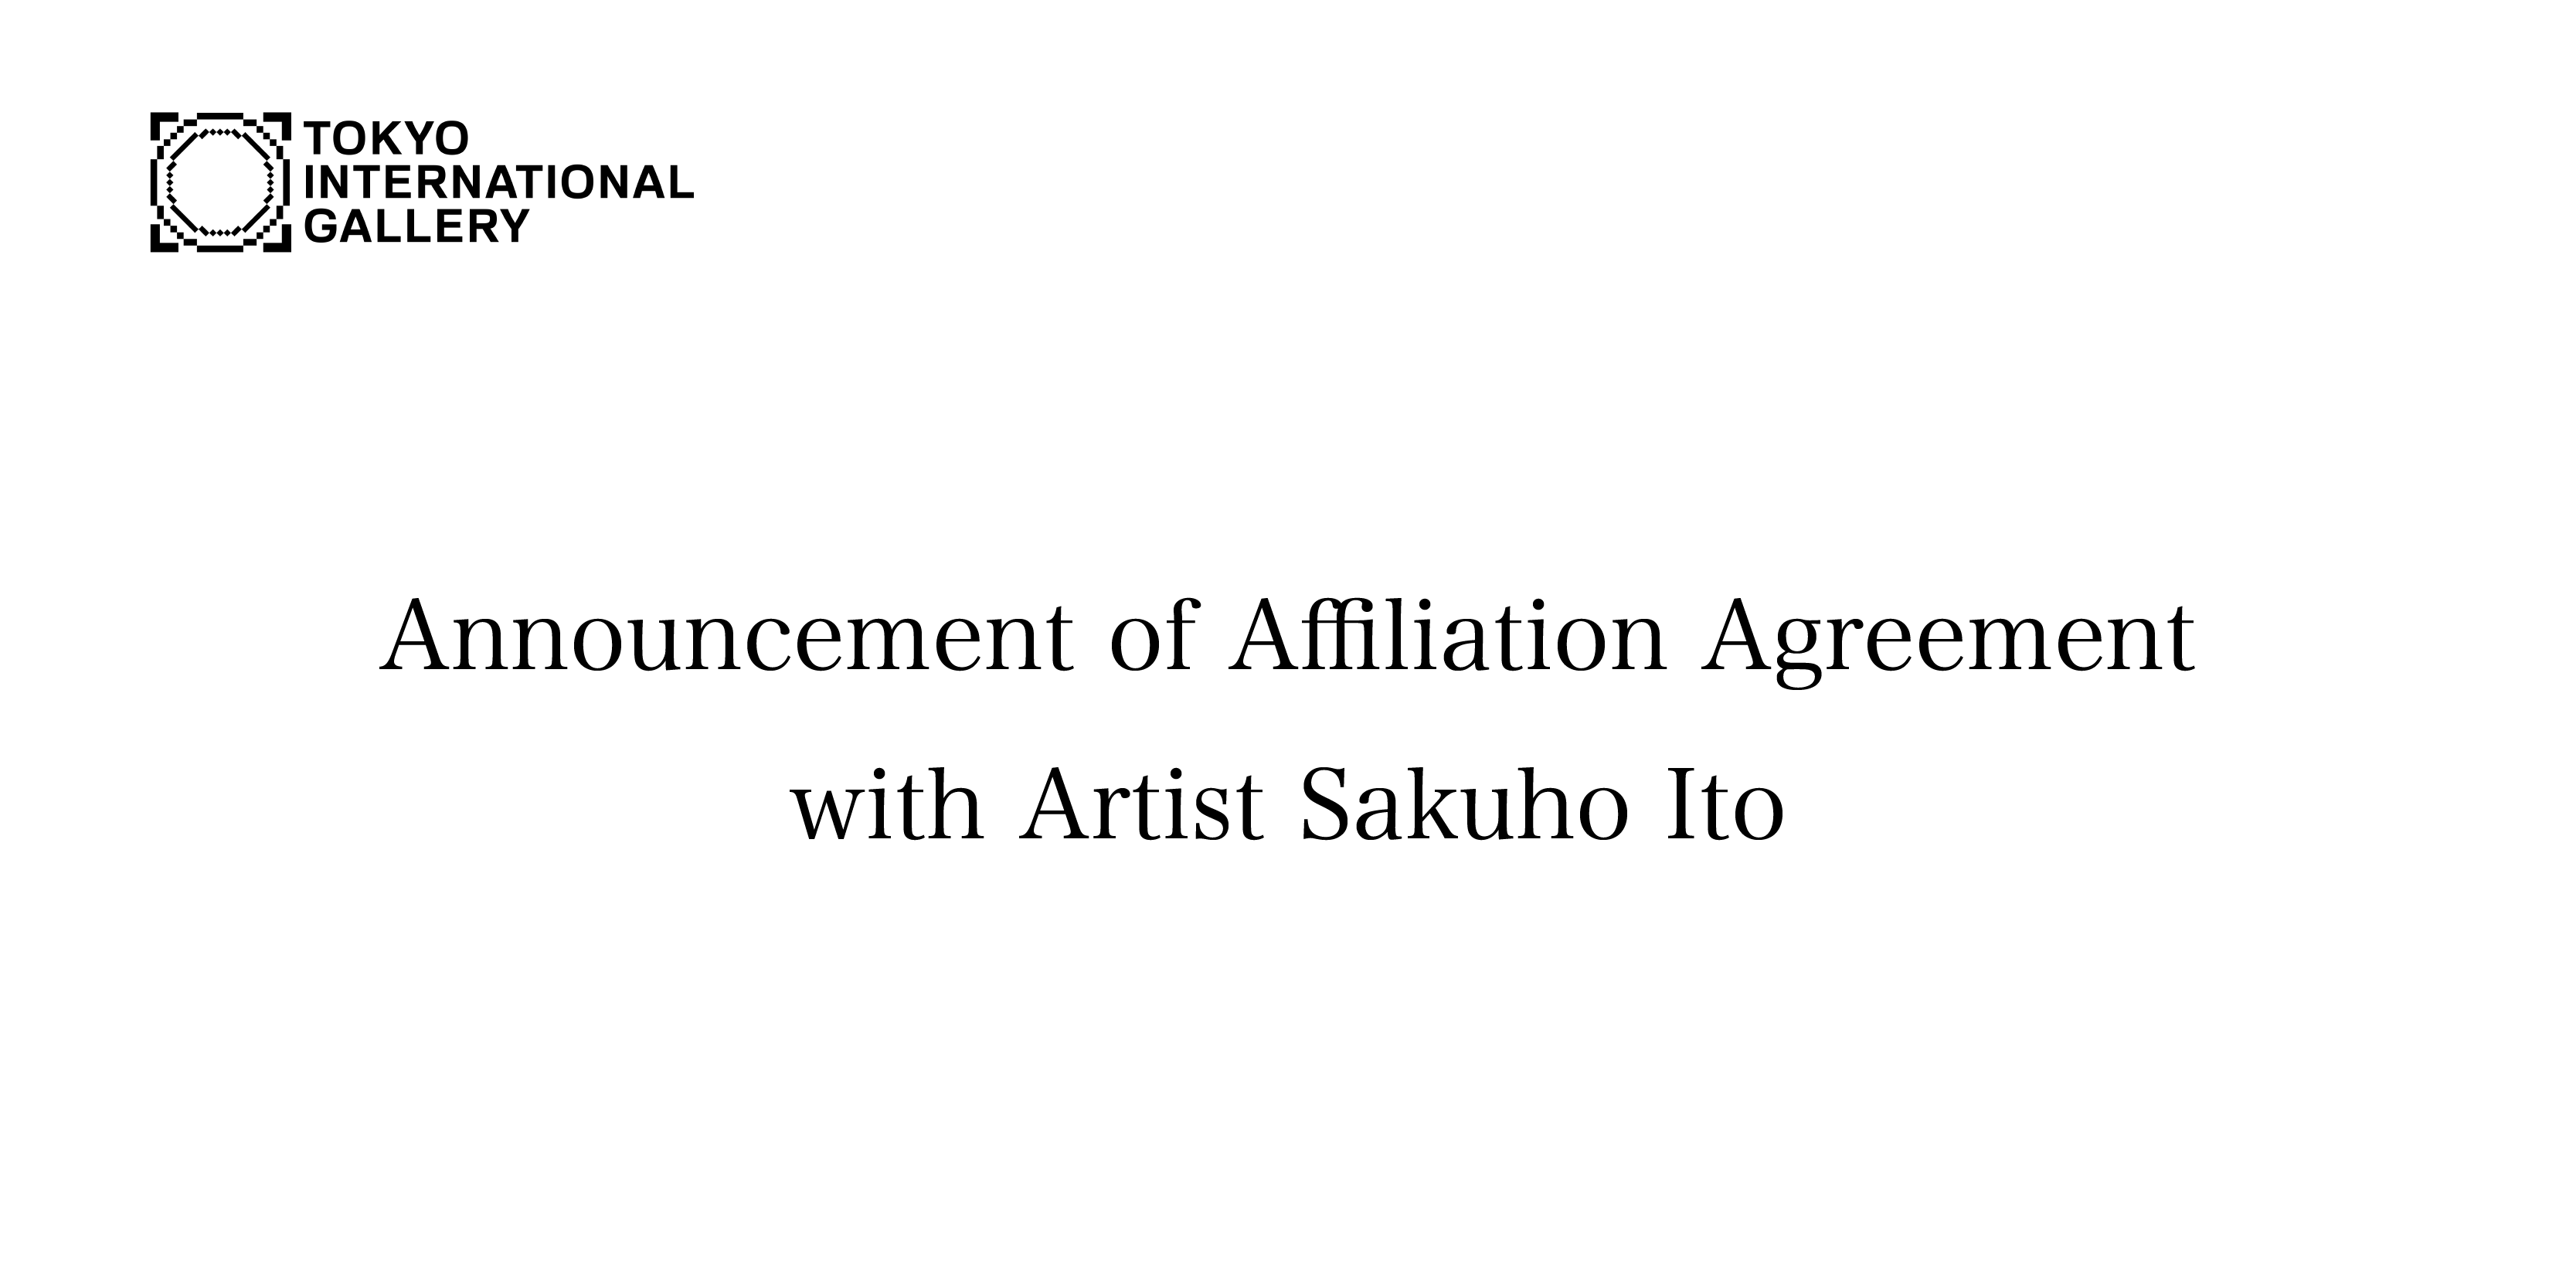 Tokyo International Gallery Signs Affiliation Agreement with Artist Sakuho Ito